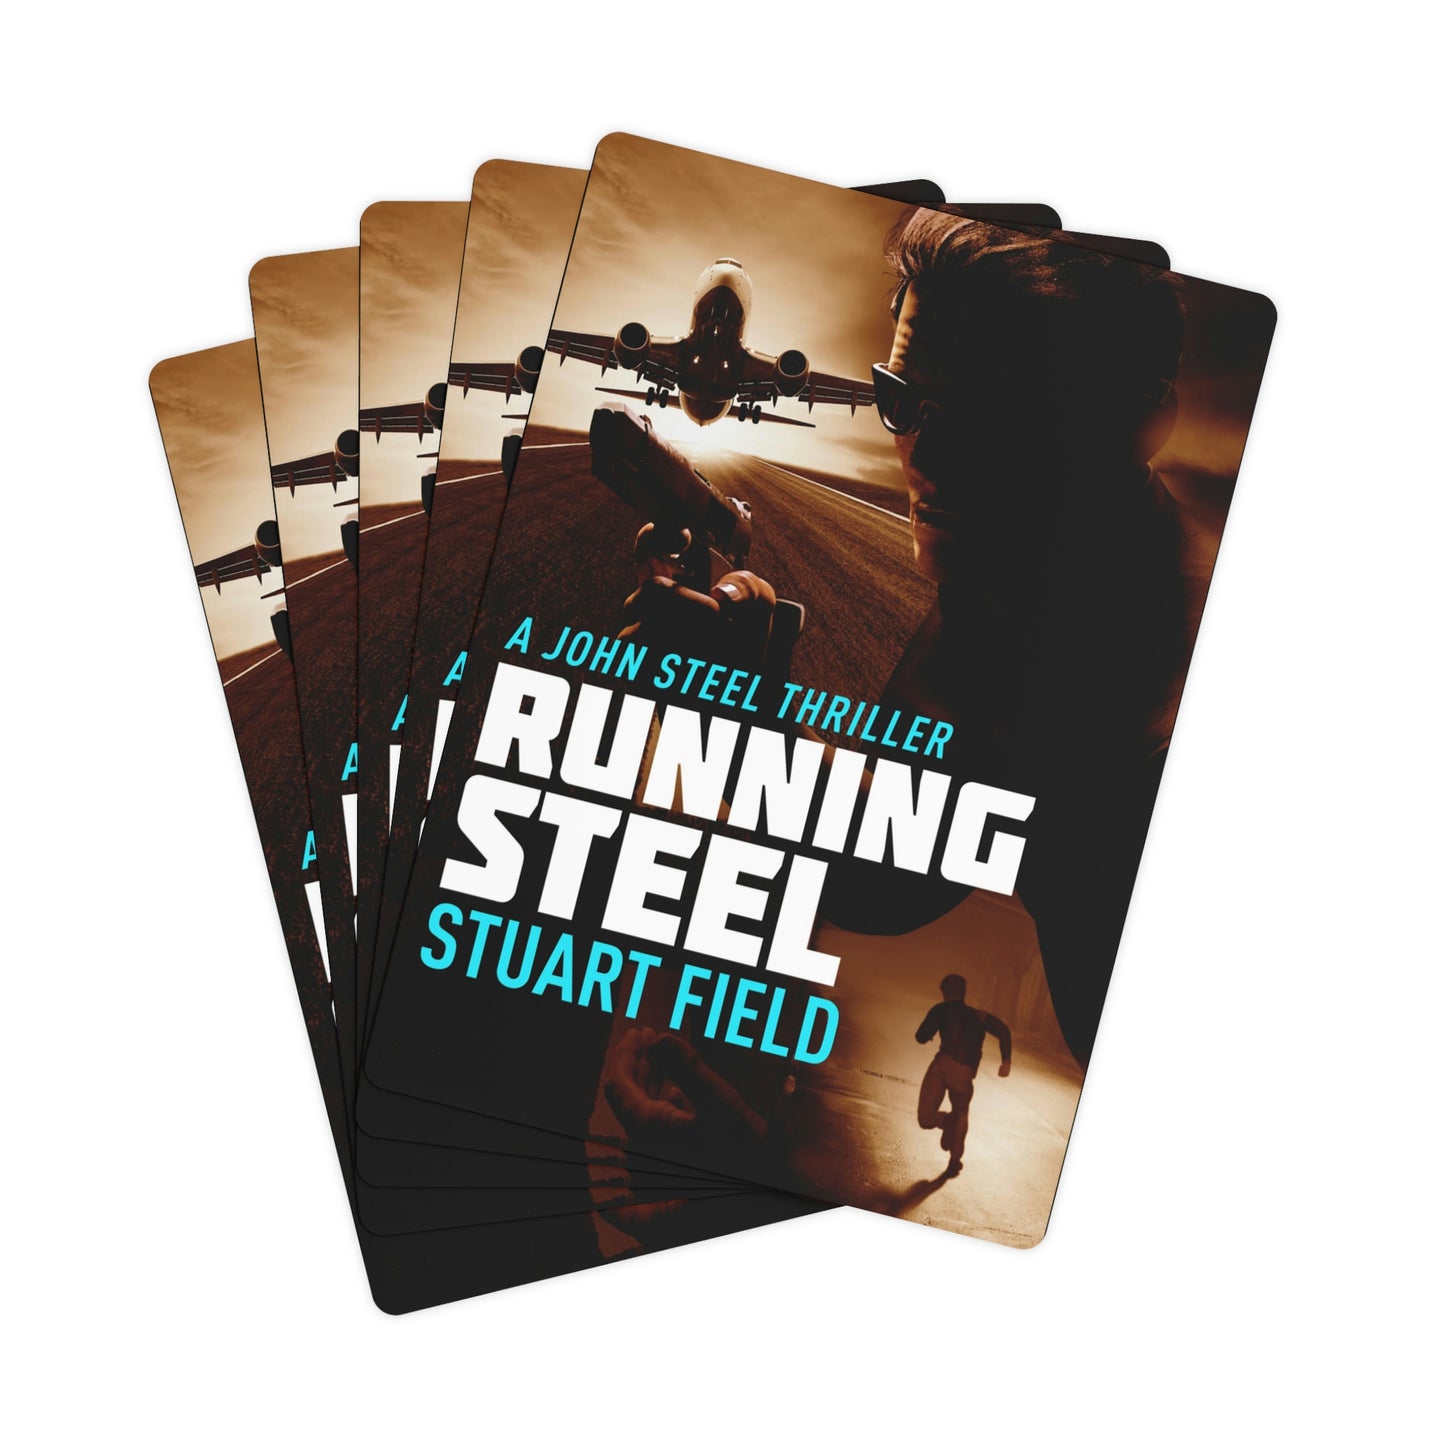 Running Steel - Playing Cards